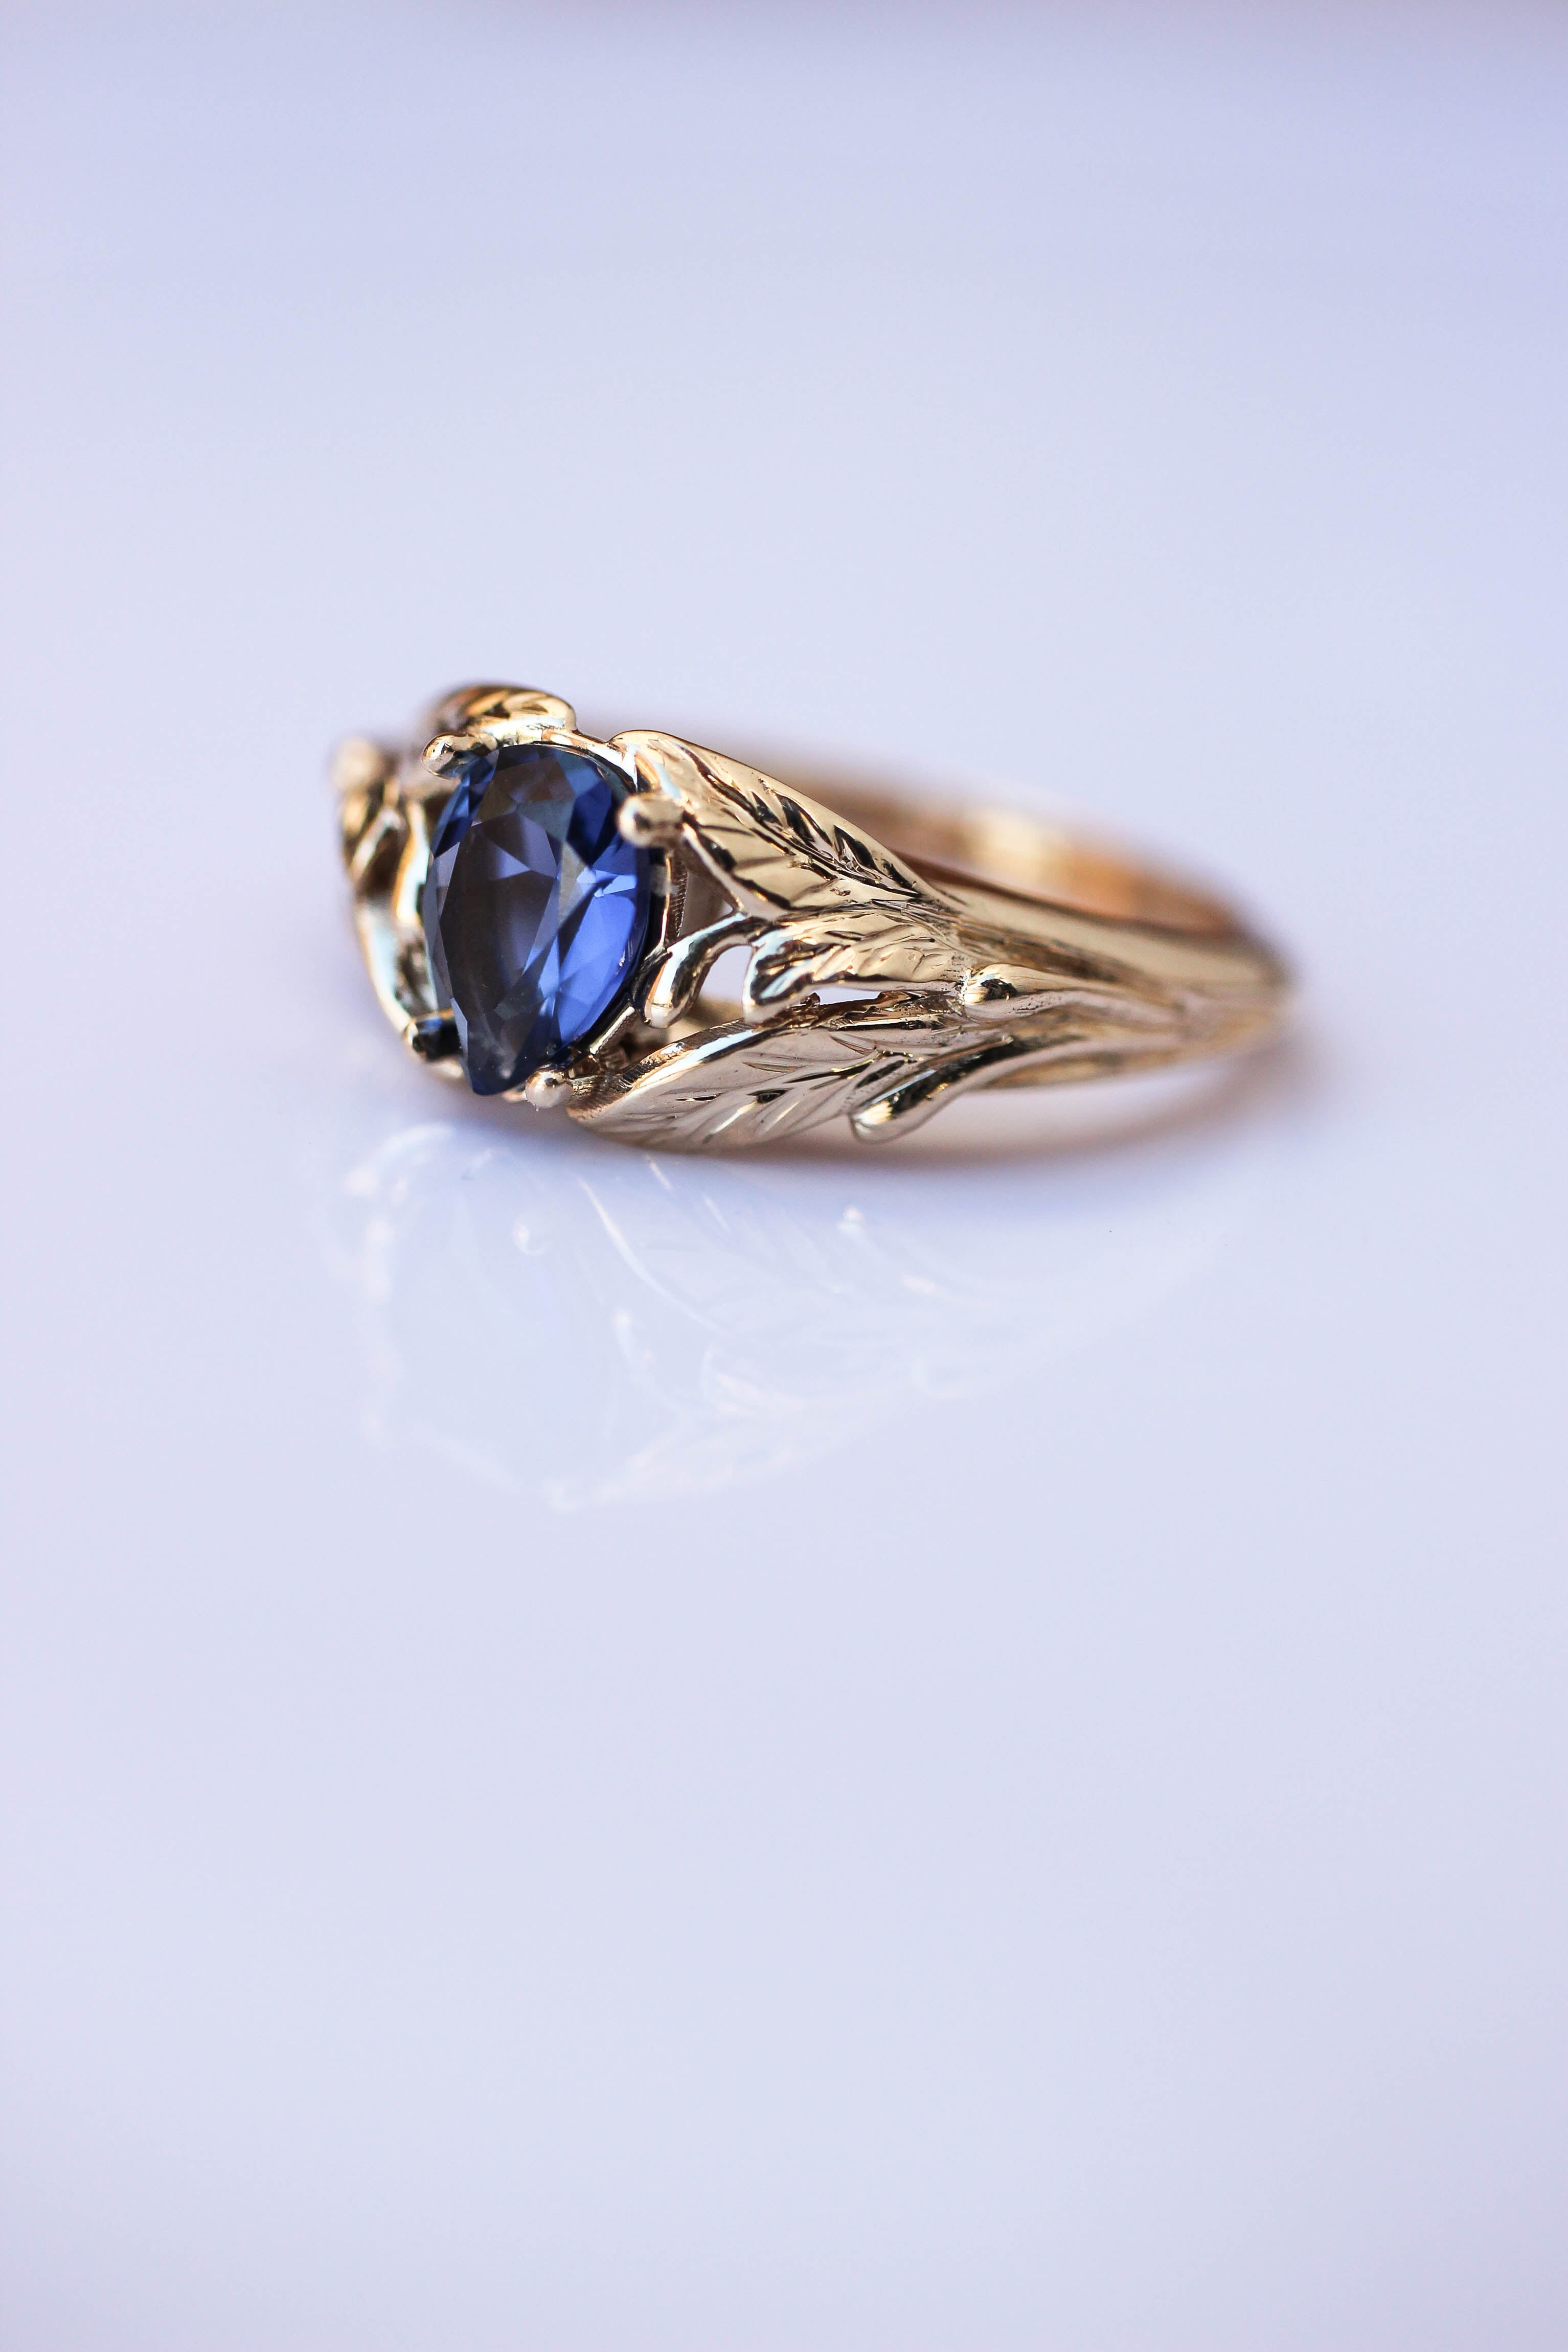 Blue lab sapphire ring, gold leaves engagement ring / Wisteria | Eden ...